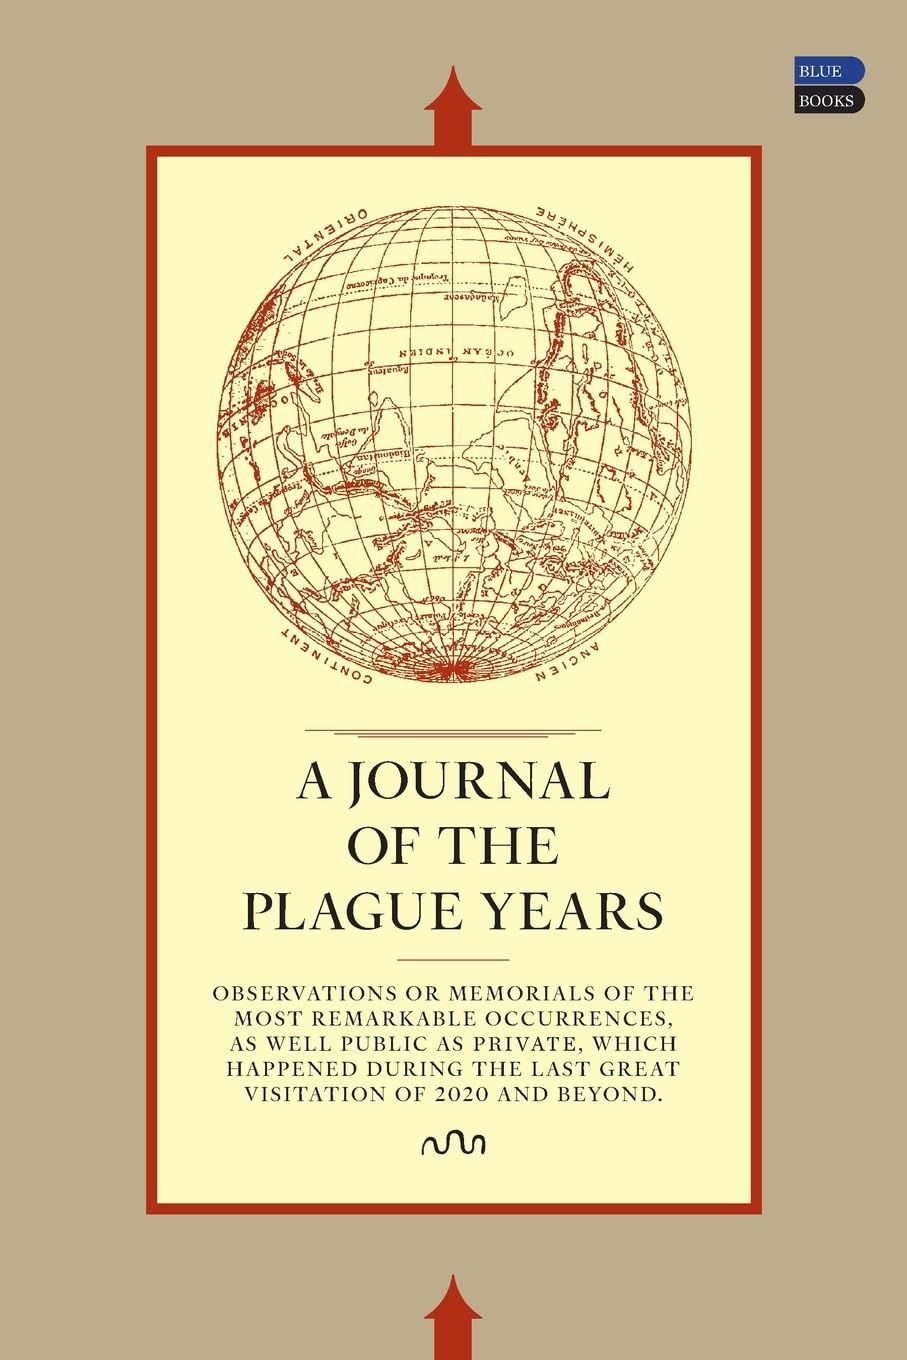 Dated and Dateless: On Susan Zakin and Brian Cullman’s “A Journal of the Plague Years”